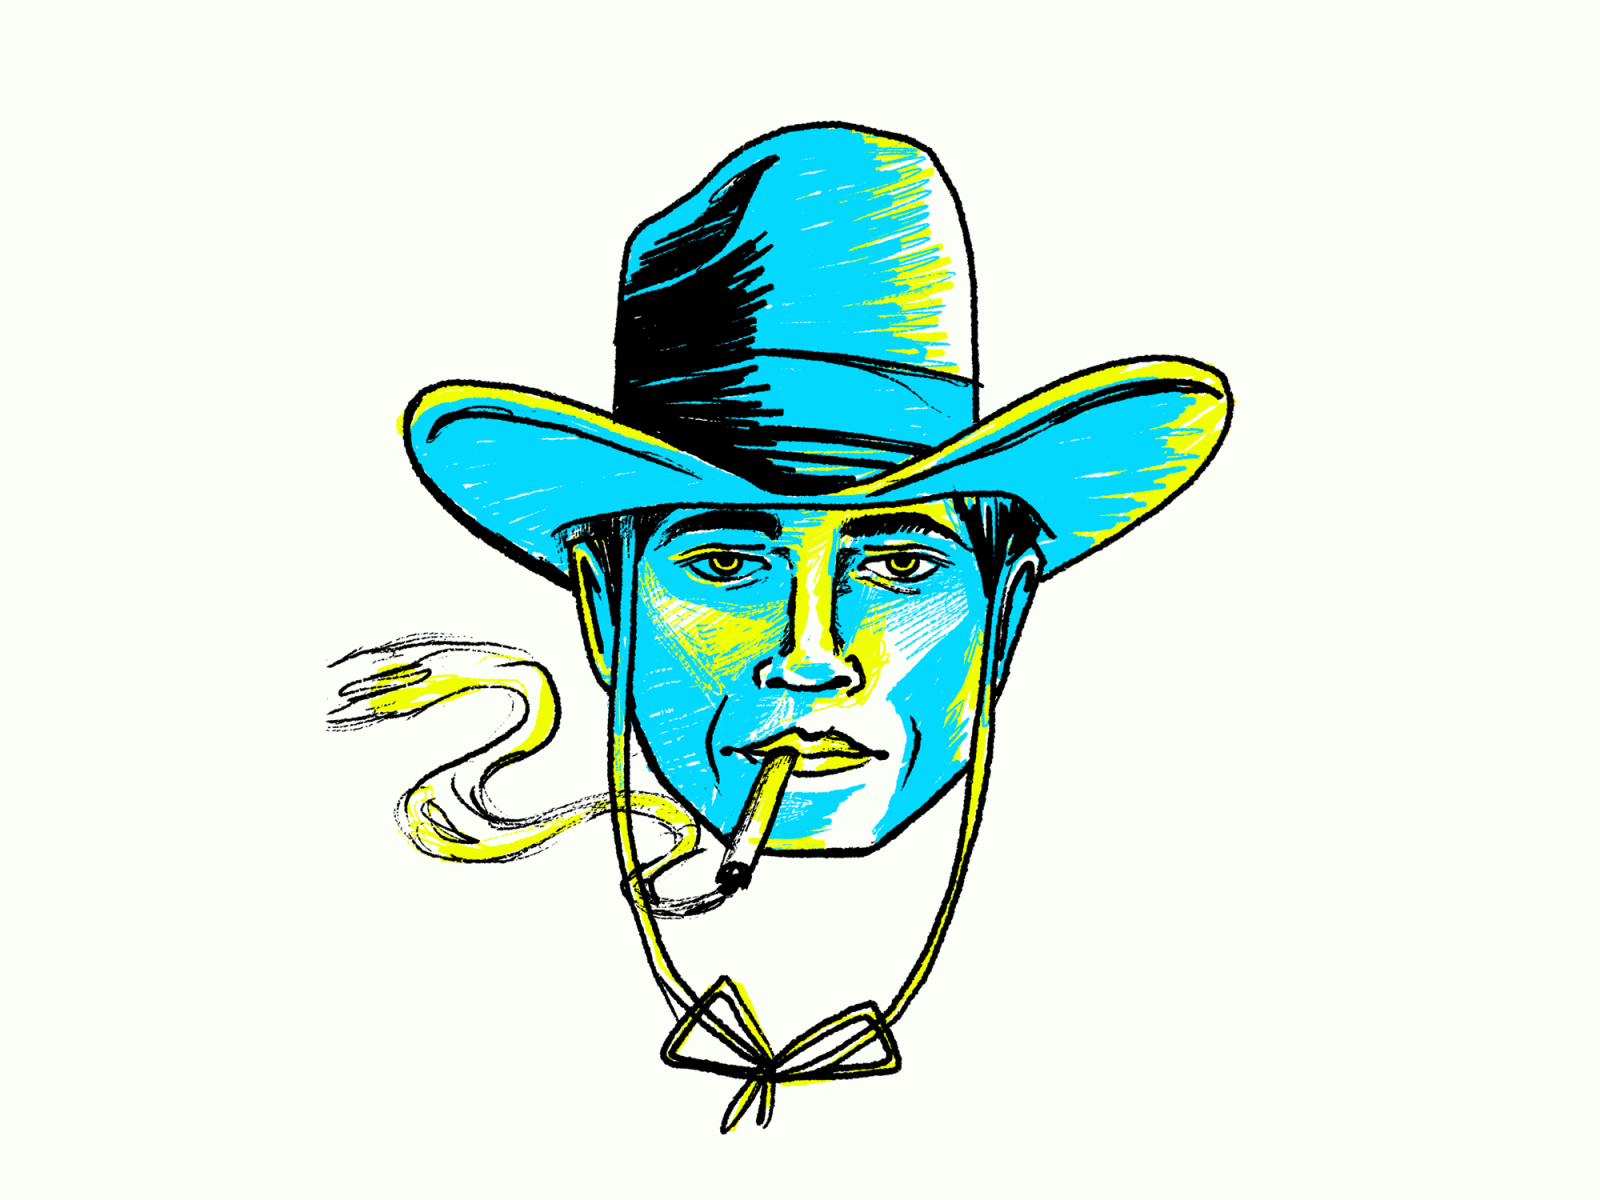 Cowboy by Carra Sykes on Dribbble